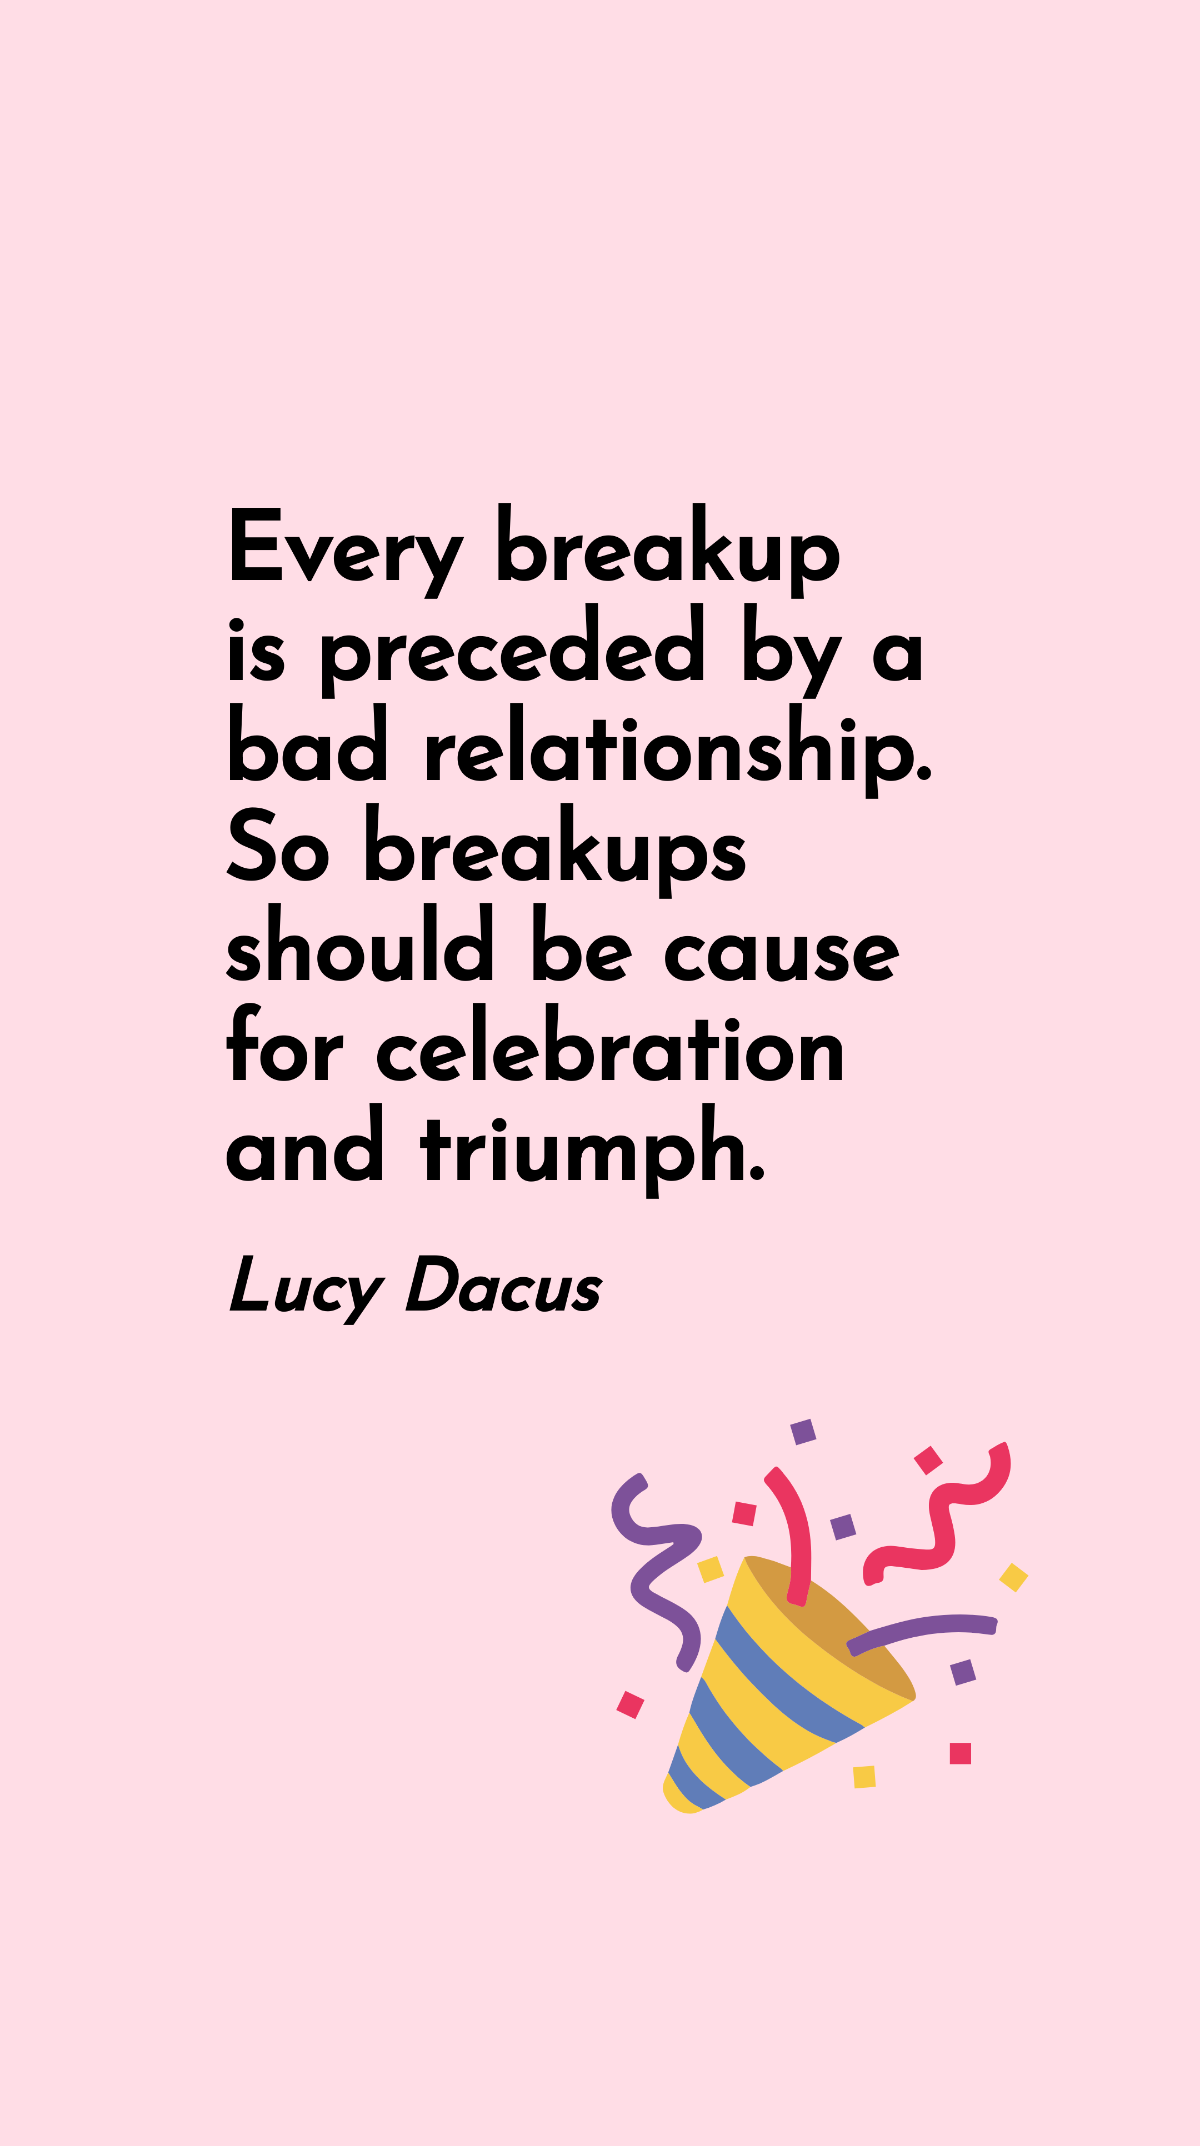 Lucy Dacus - Every breakup is preceded by a bad relationship. So breakups should be cause for celebration and triumph. Template